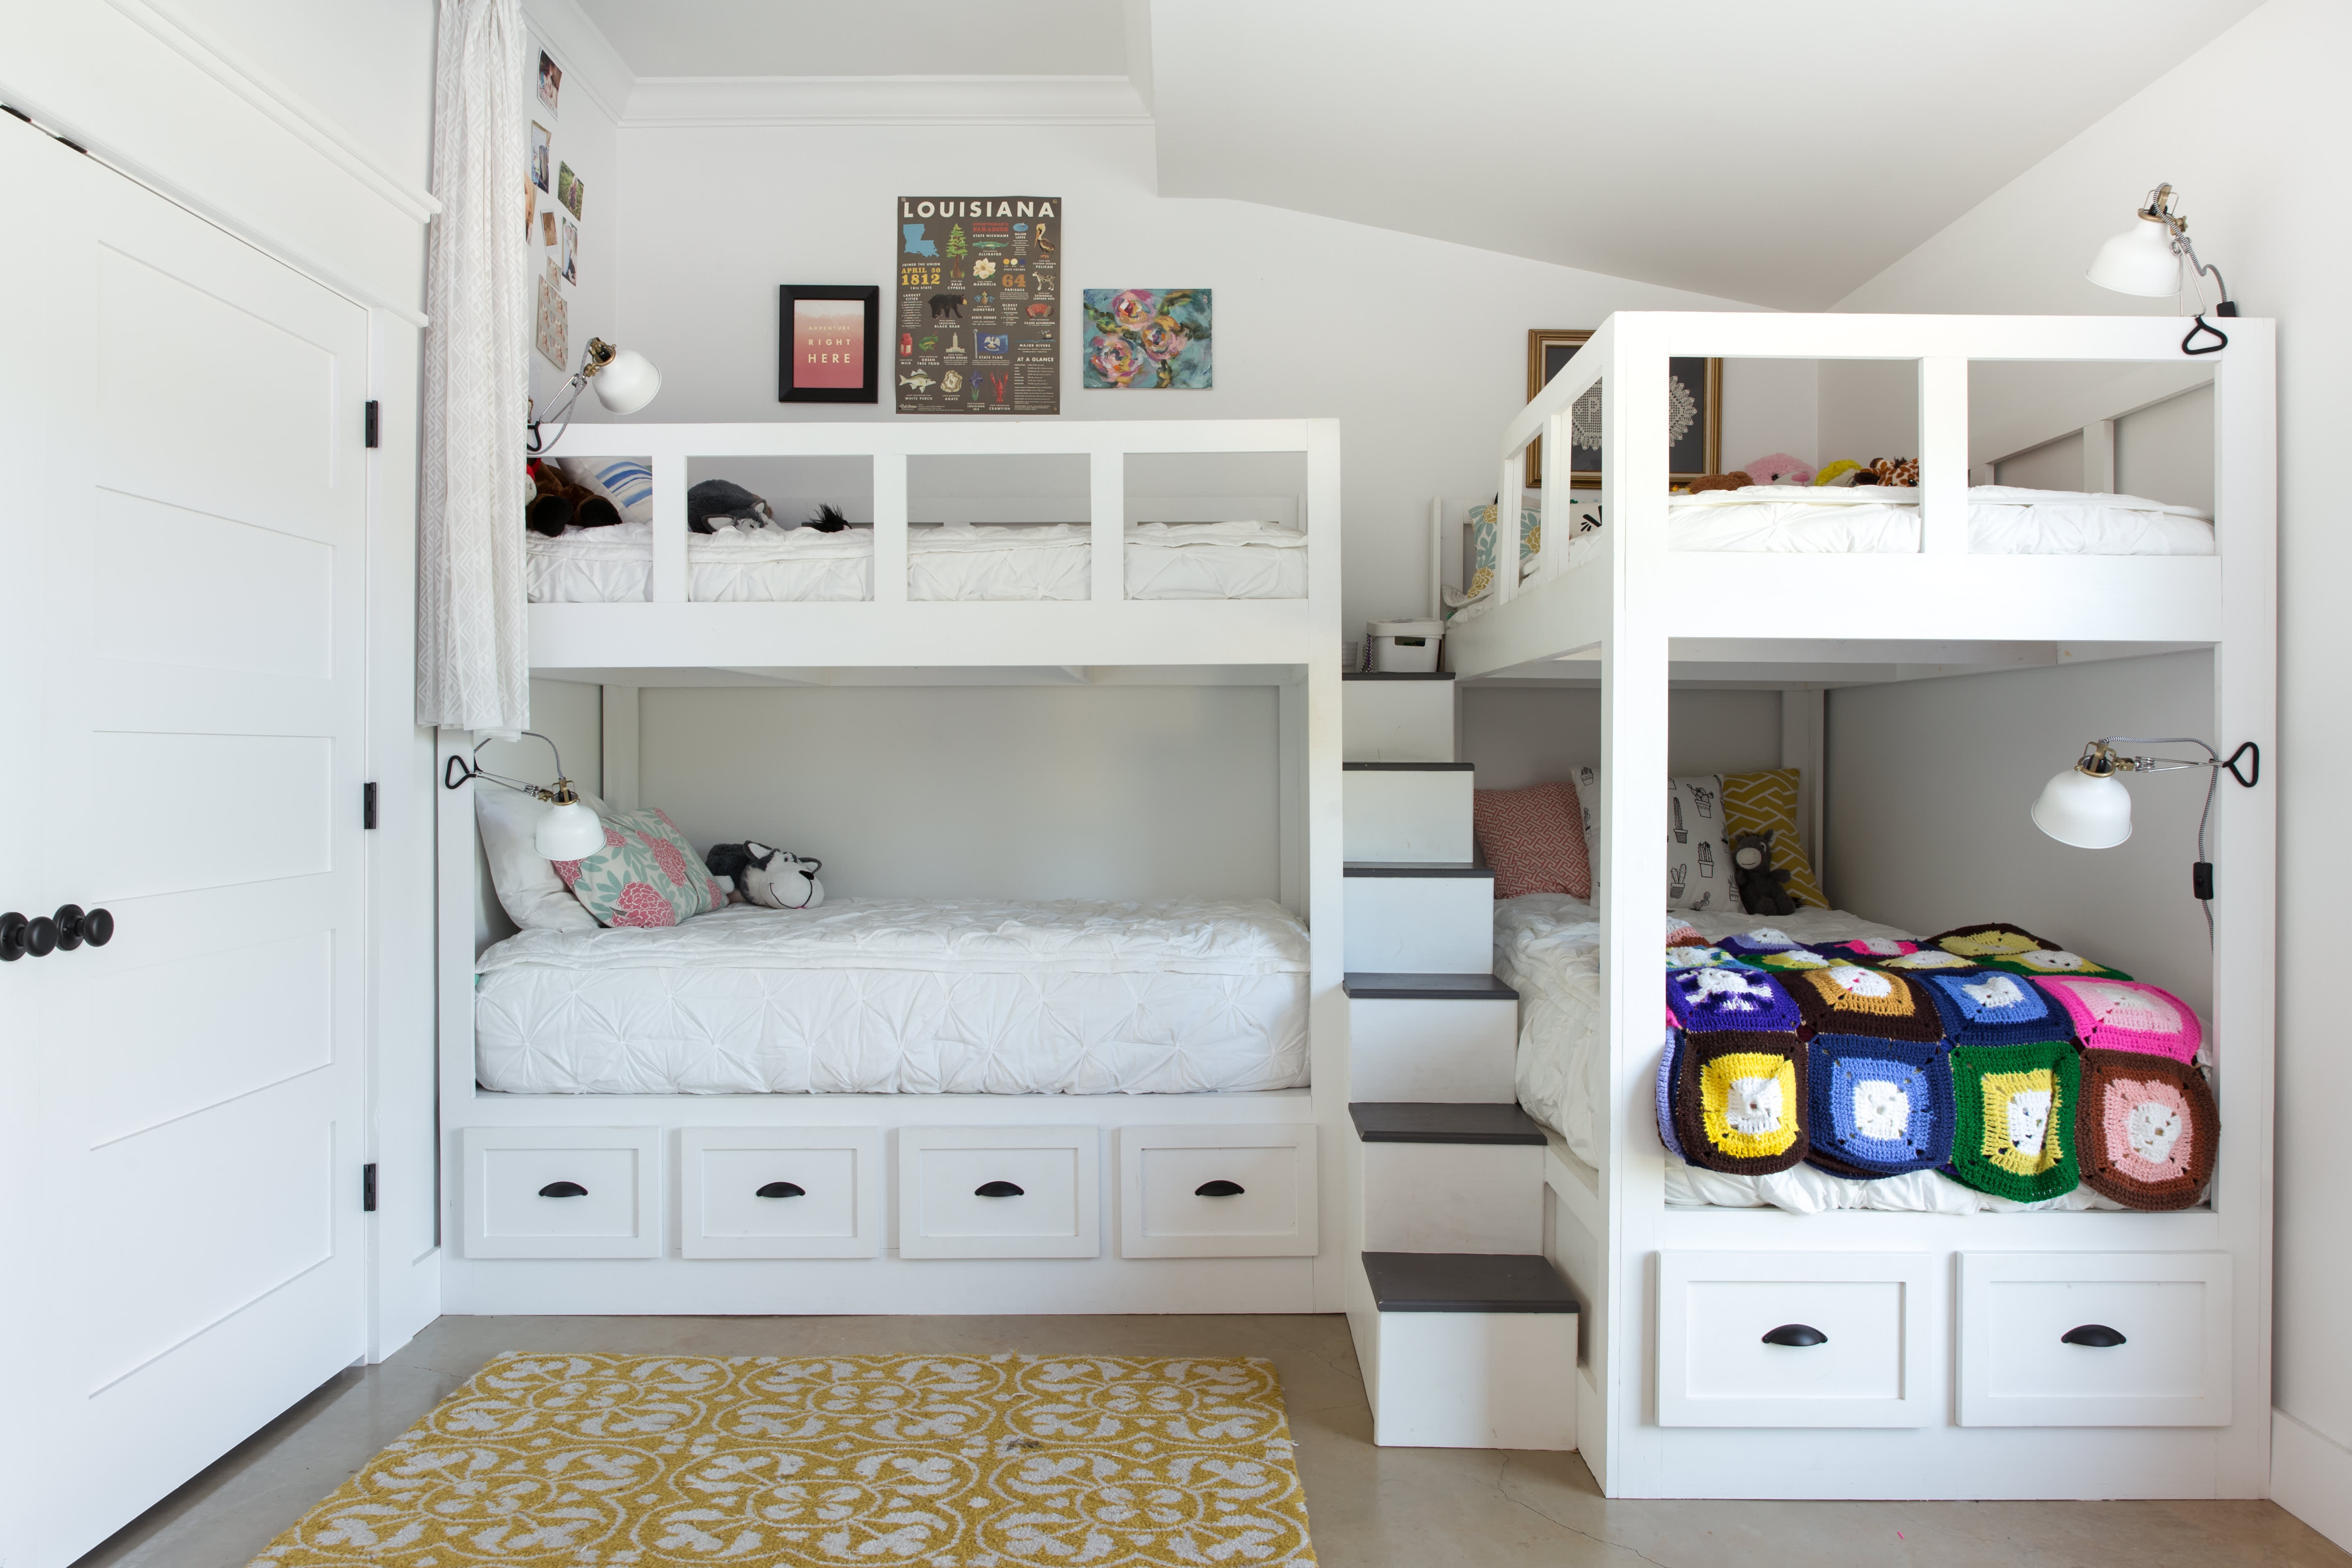 10 Best Bunk Beds With Storage 2022: Drawers, Closets, Desks | Cubby